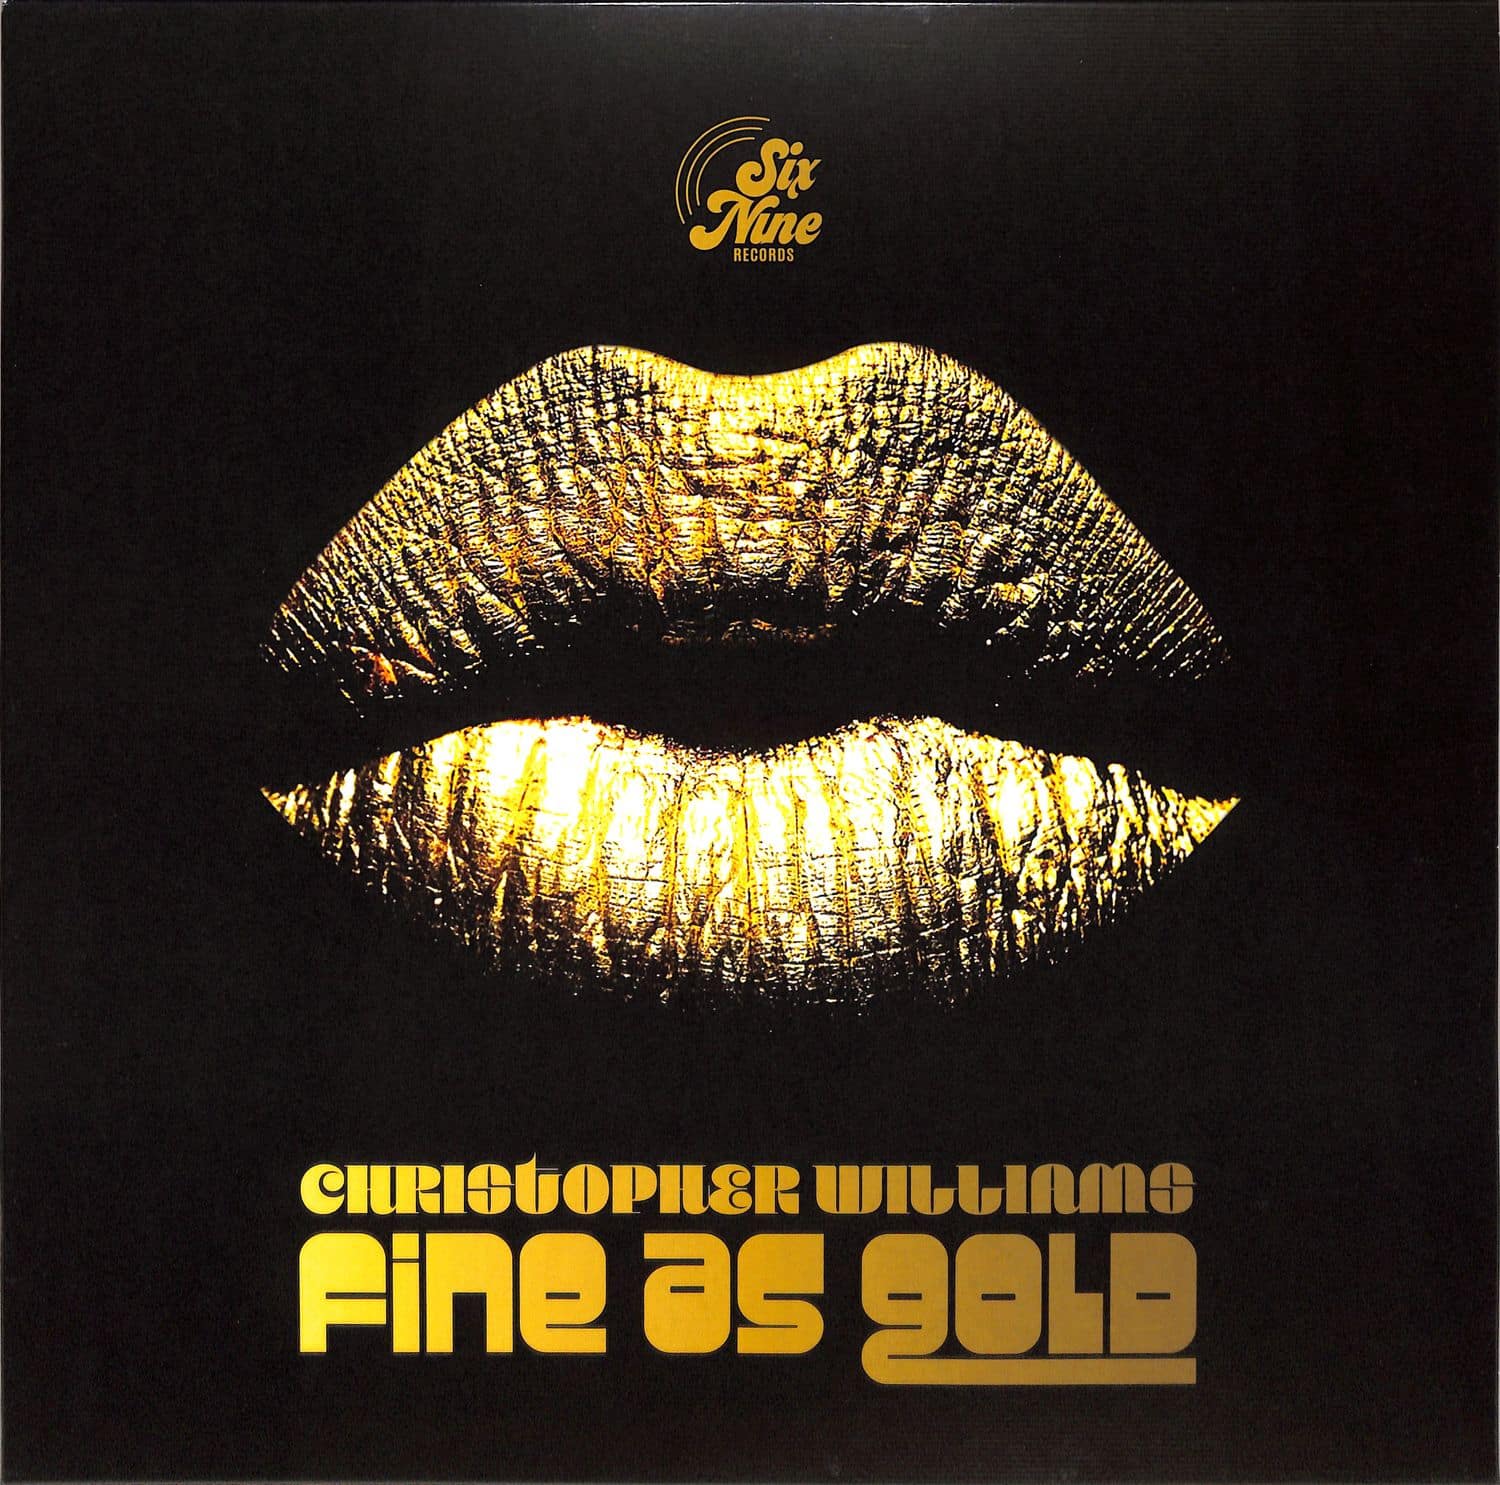 Christopher Williams - FINE AS GOLD